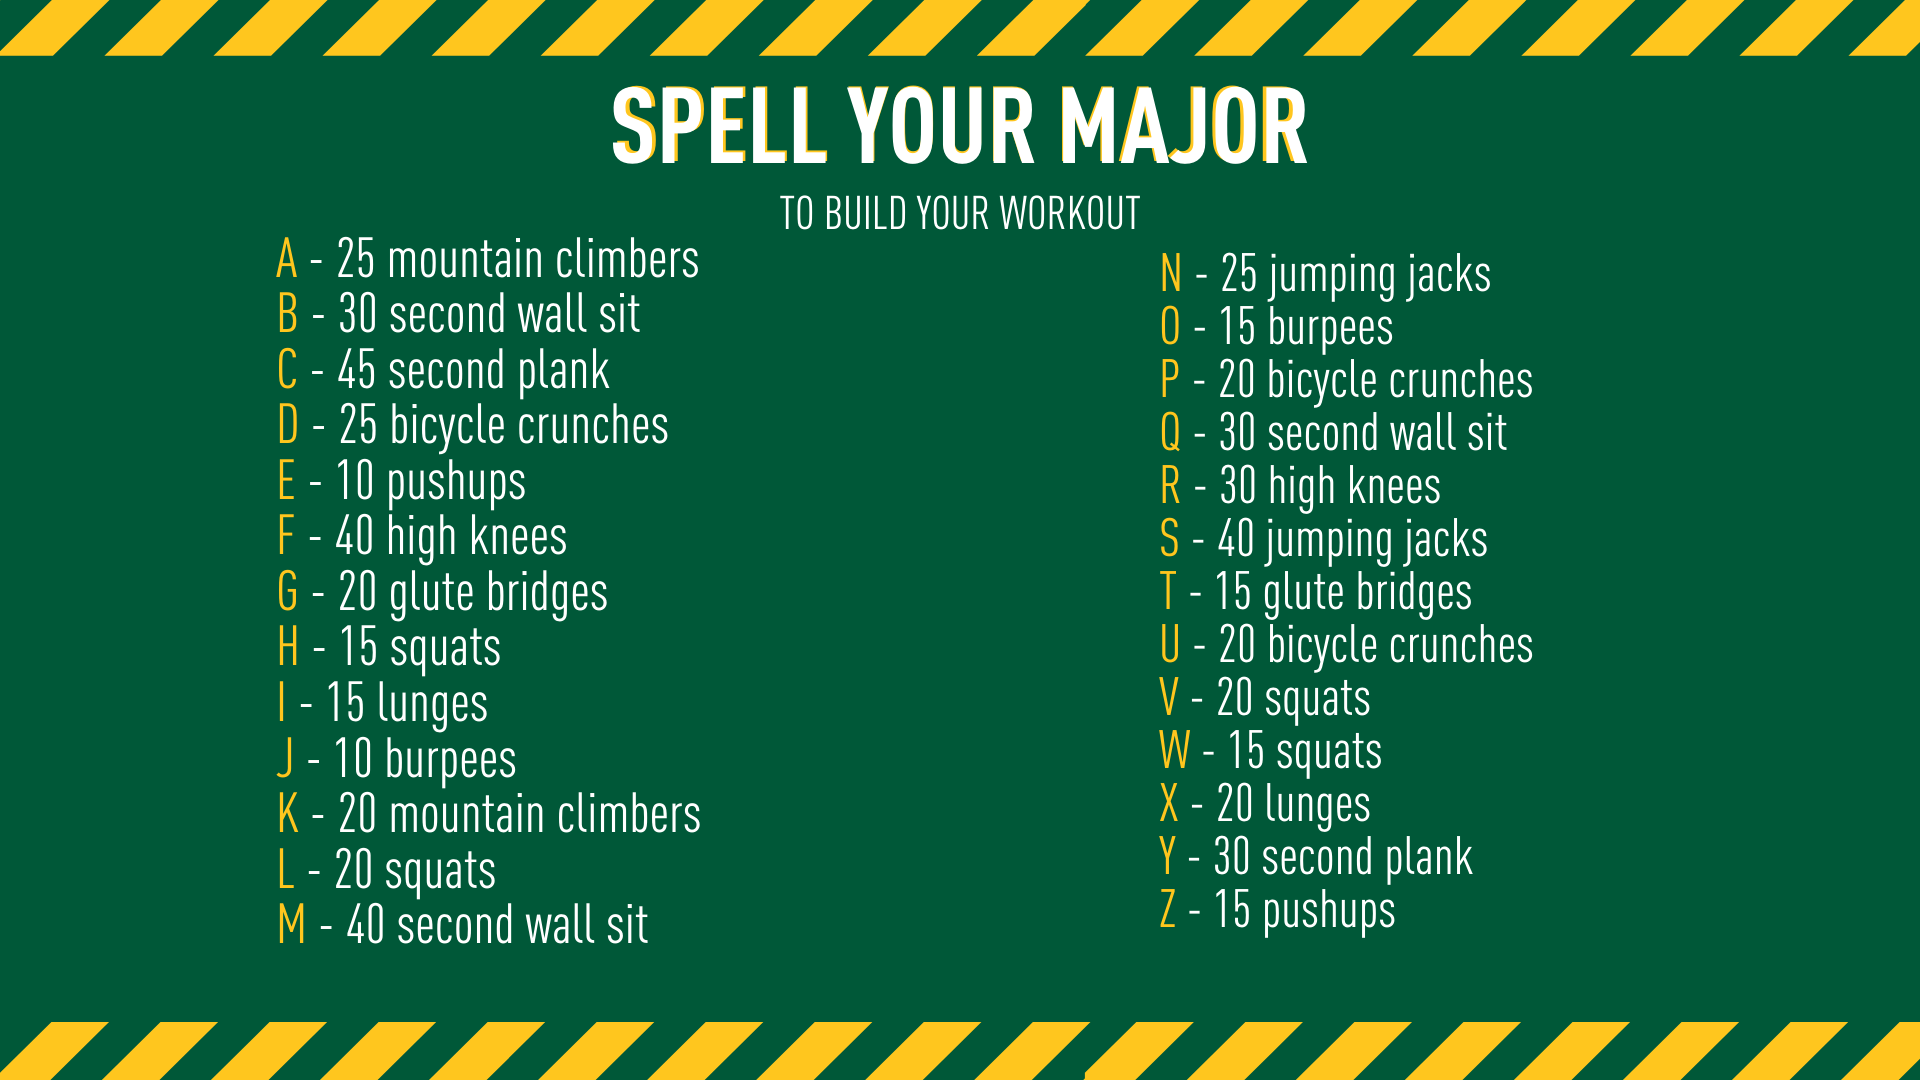 Spell your major workout